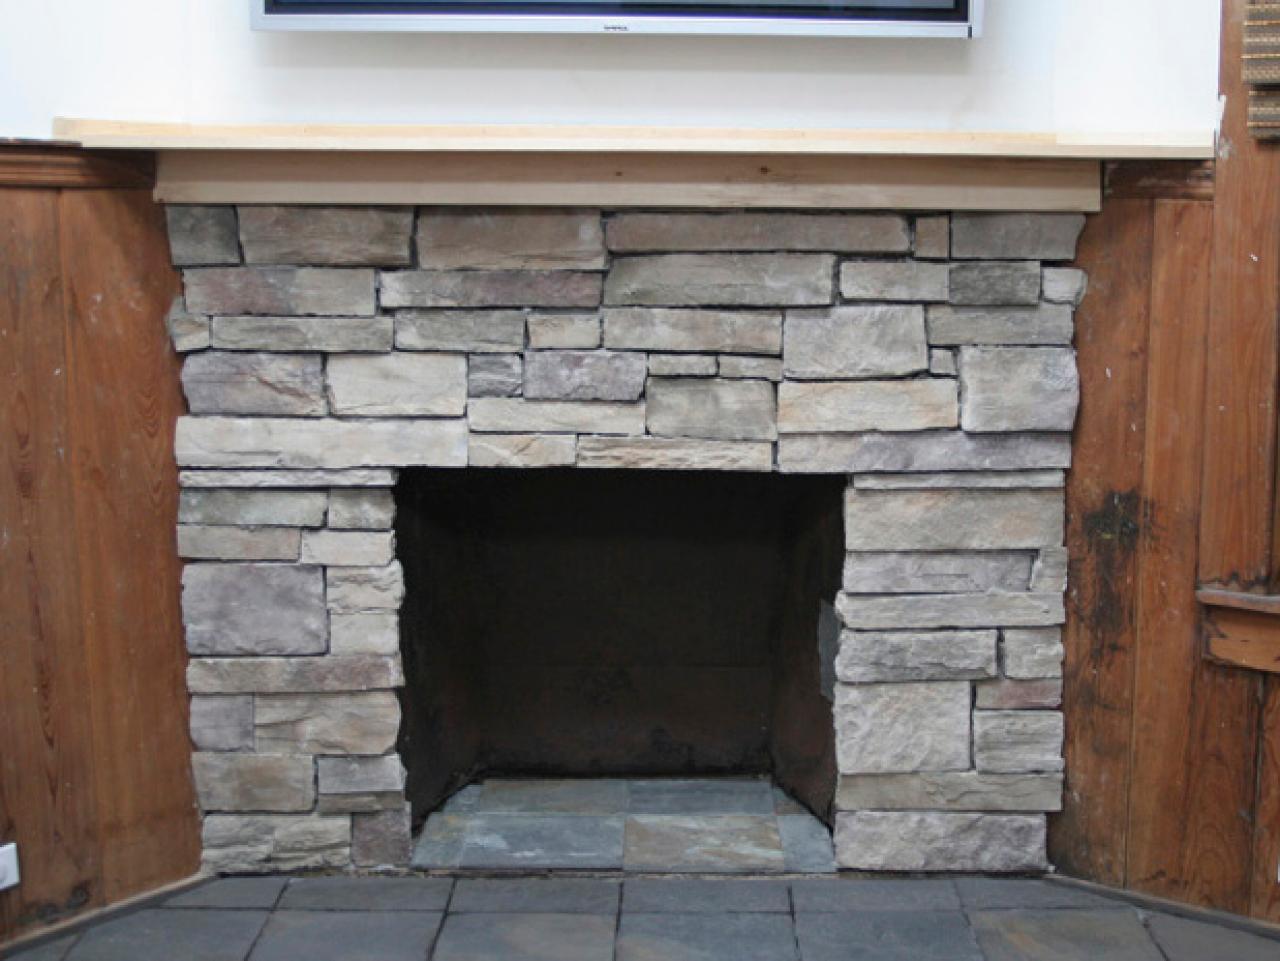 Cover A Brick Fireplace With Stone, Ideas Refacing Old Brick Fireplace